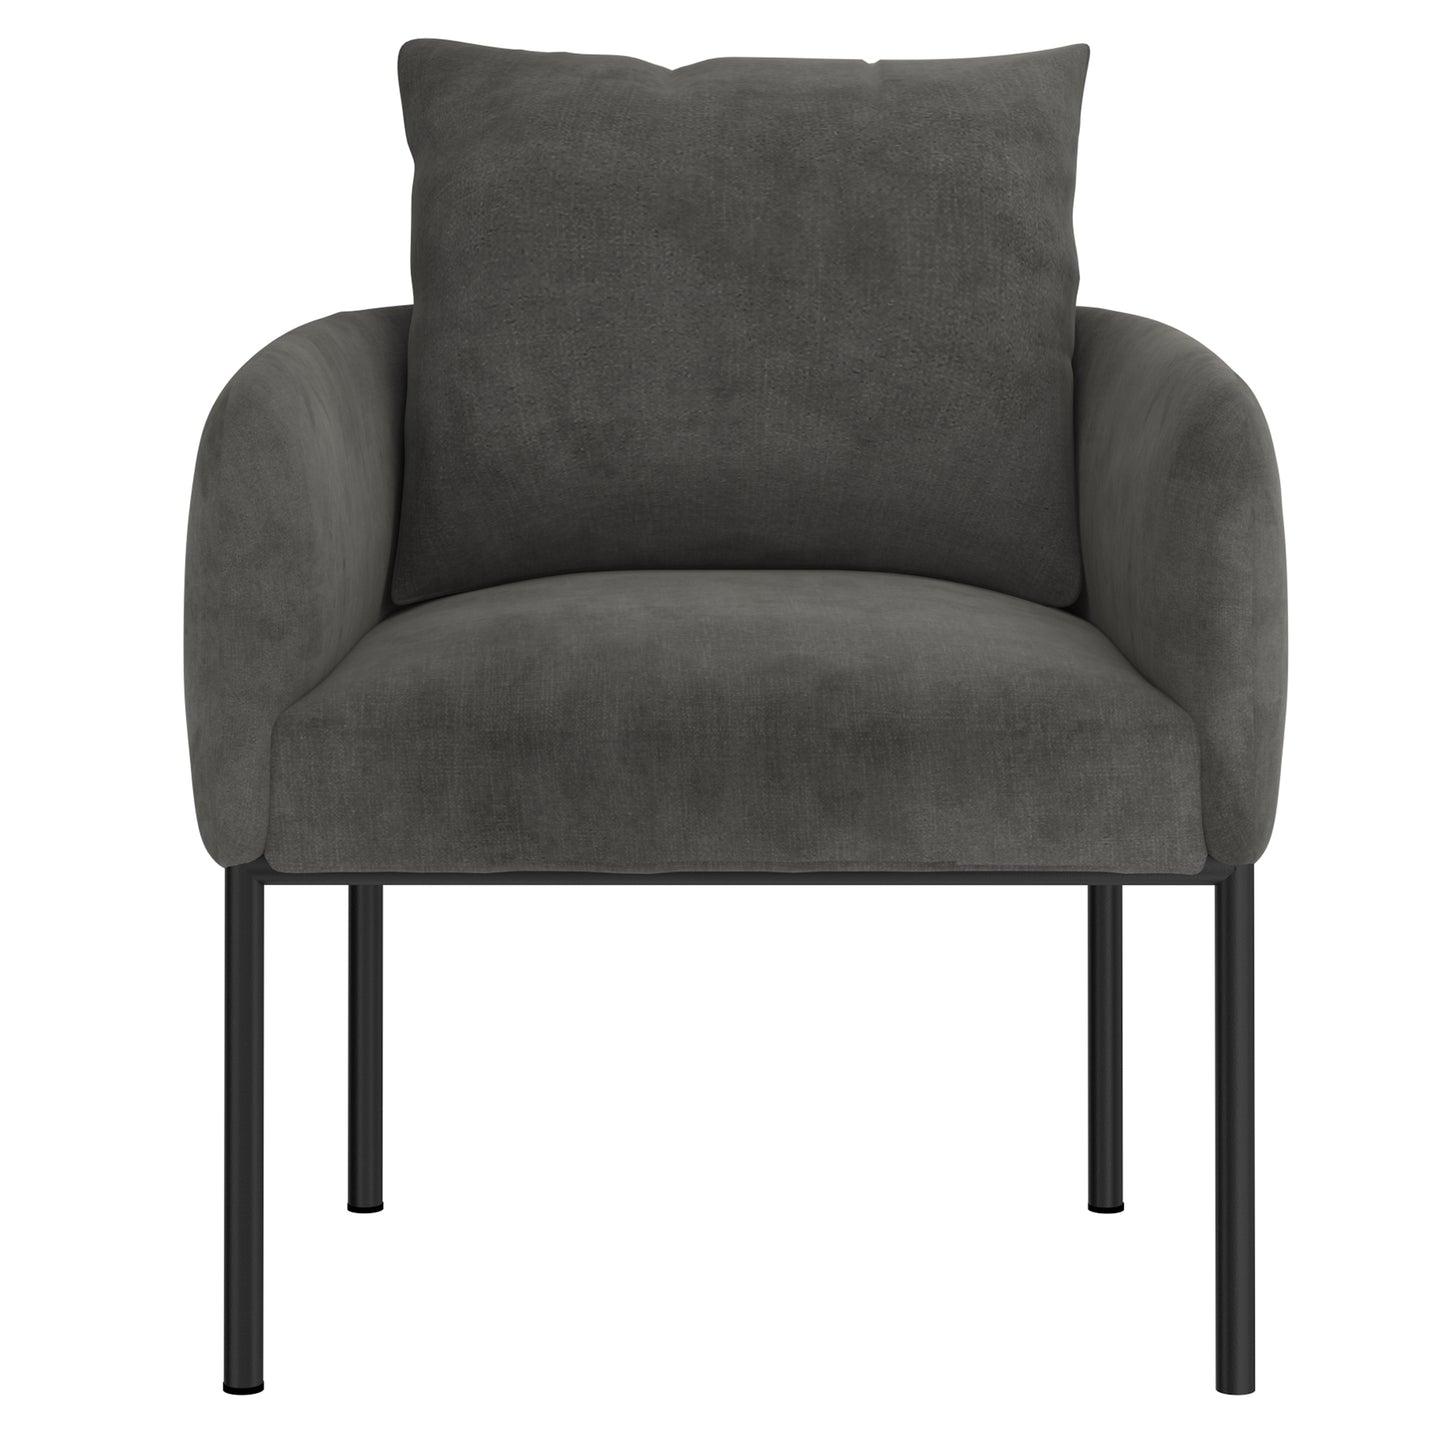 (PETRIE CHARCOAL) - FABRIC ACCENT CHAIR